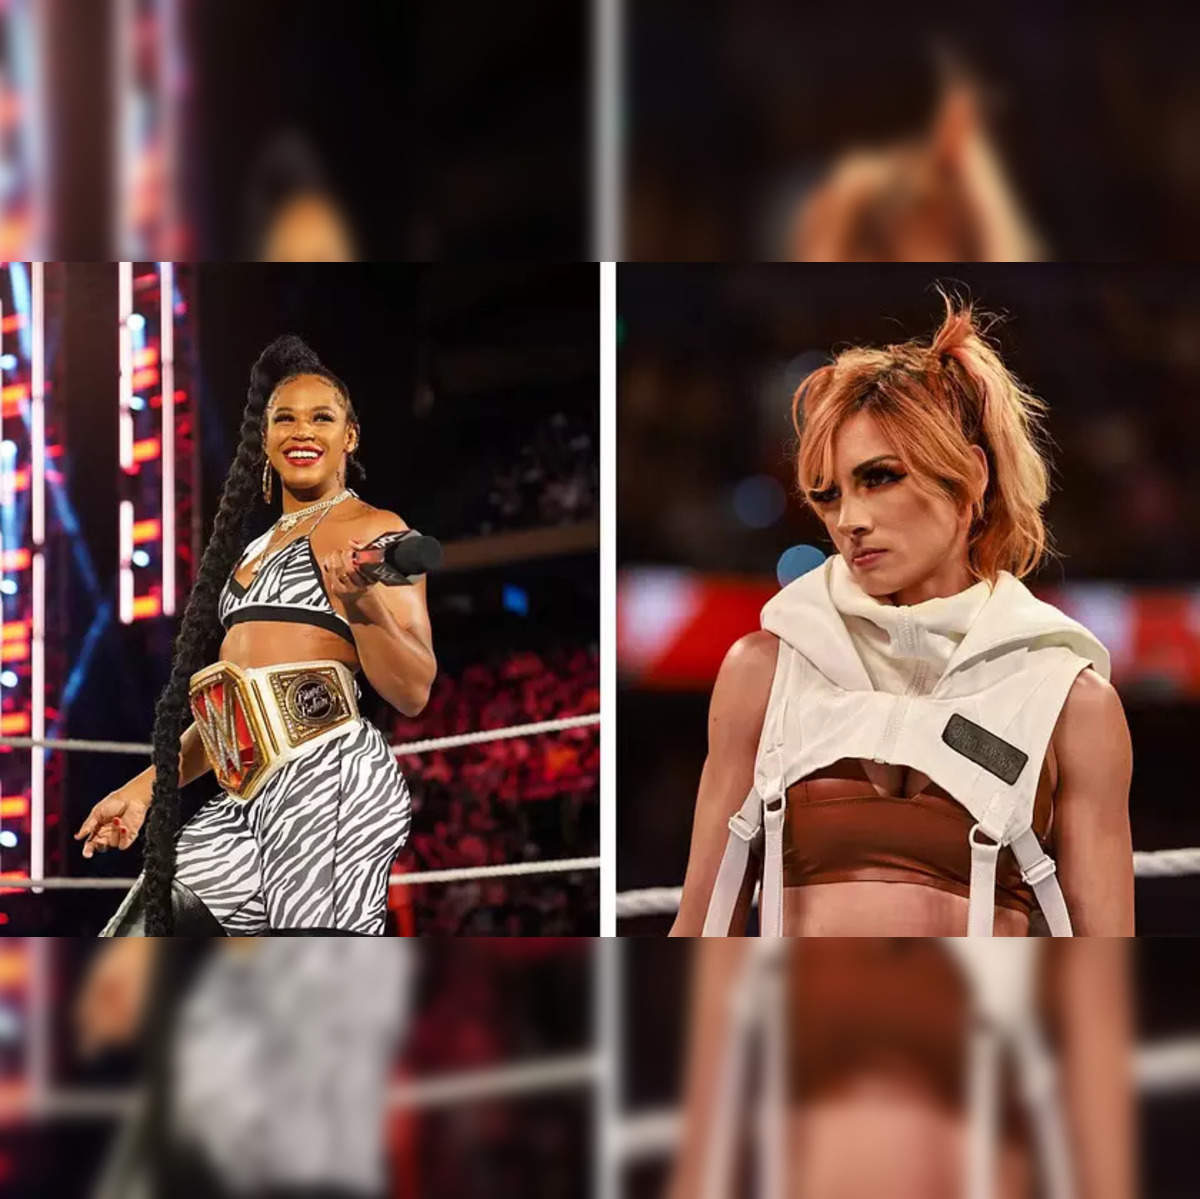 Fortnite WWE Bianca & Becky Skins: Price, Release Date & More